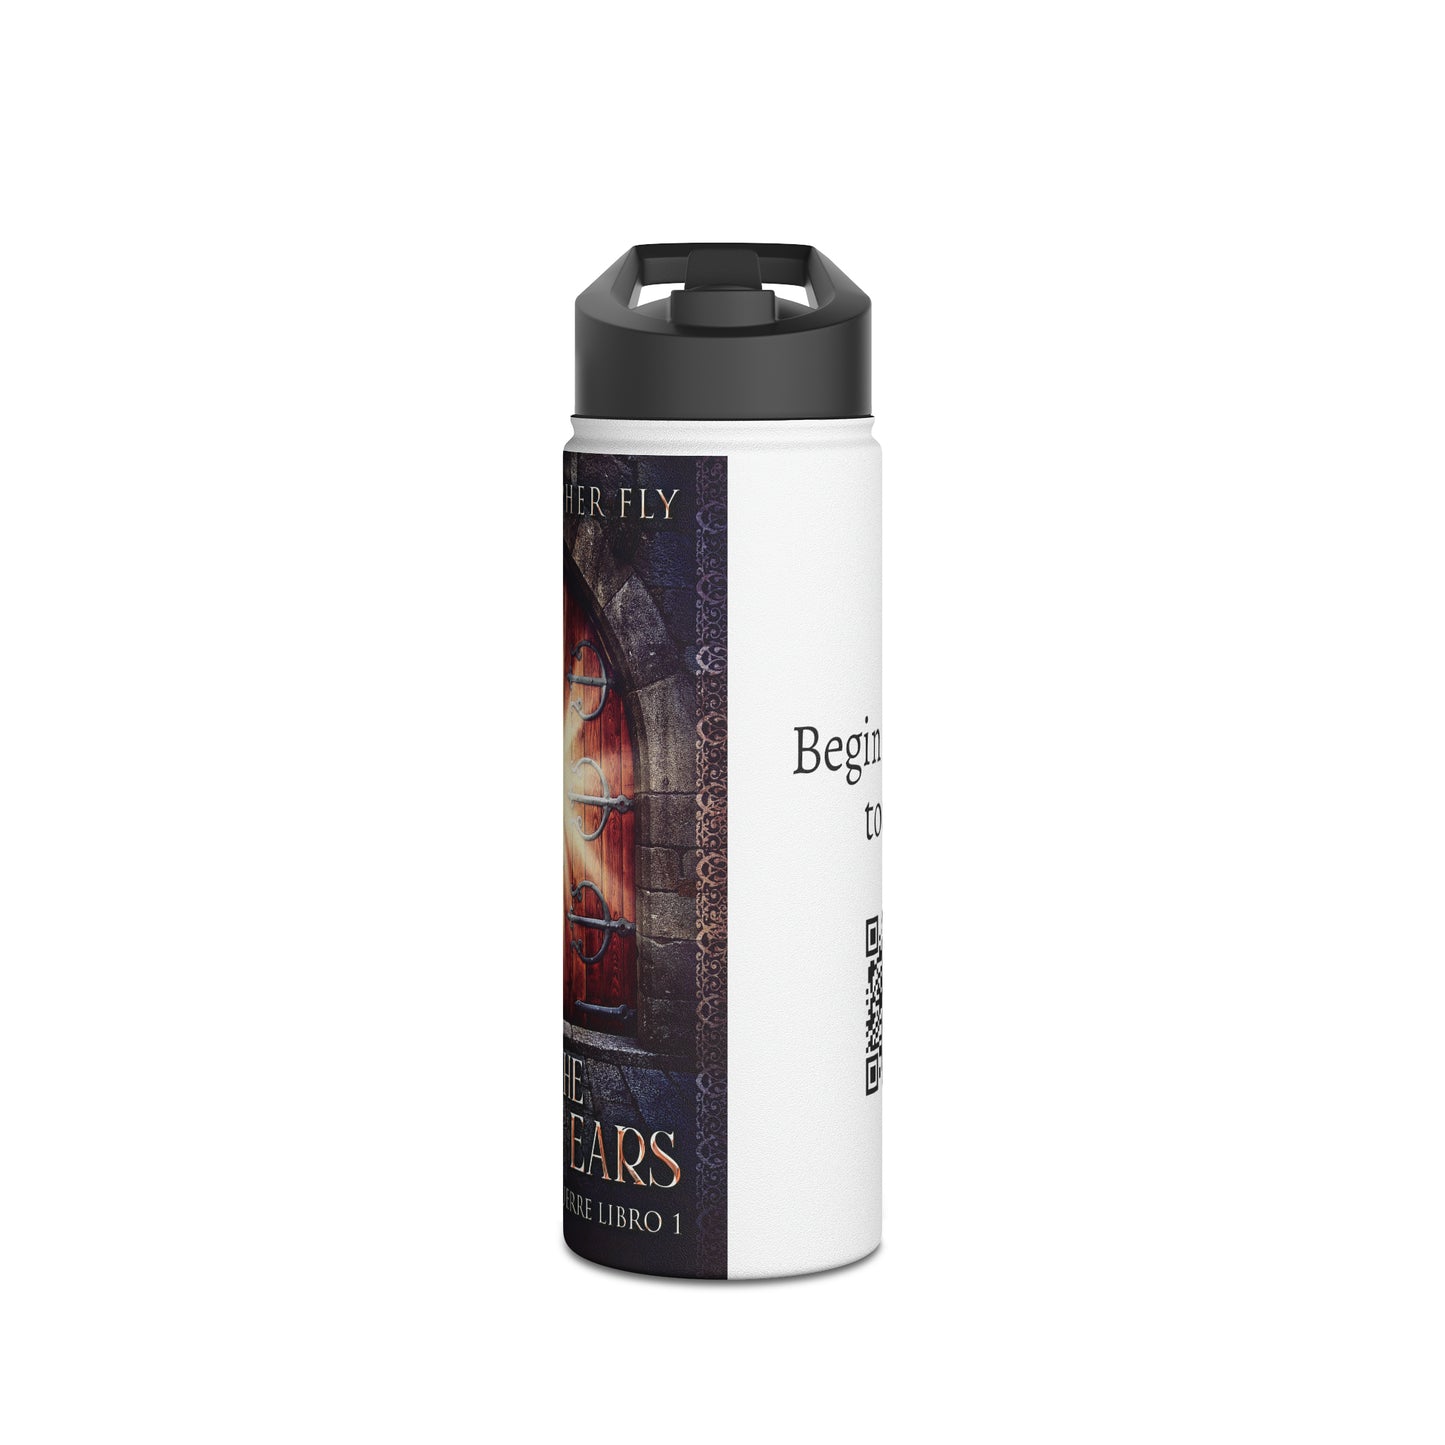 By The Gods's Ears - Stainless Steel Water Bottle